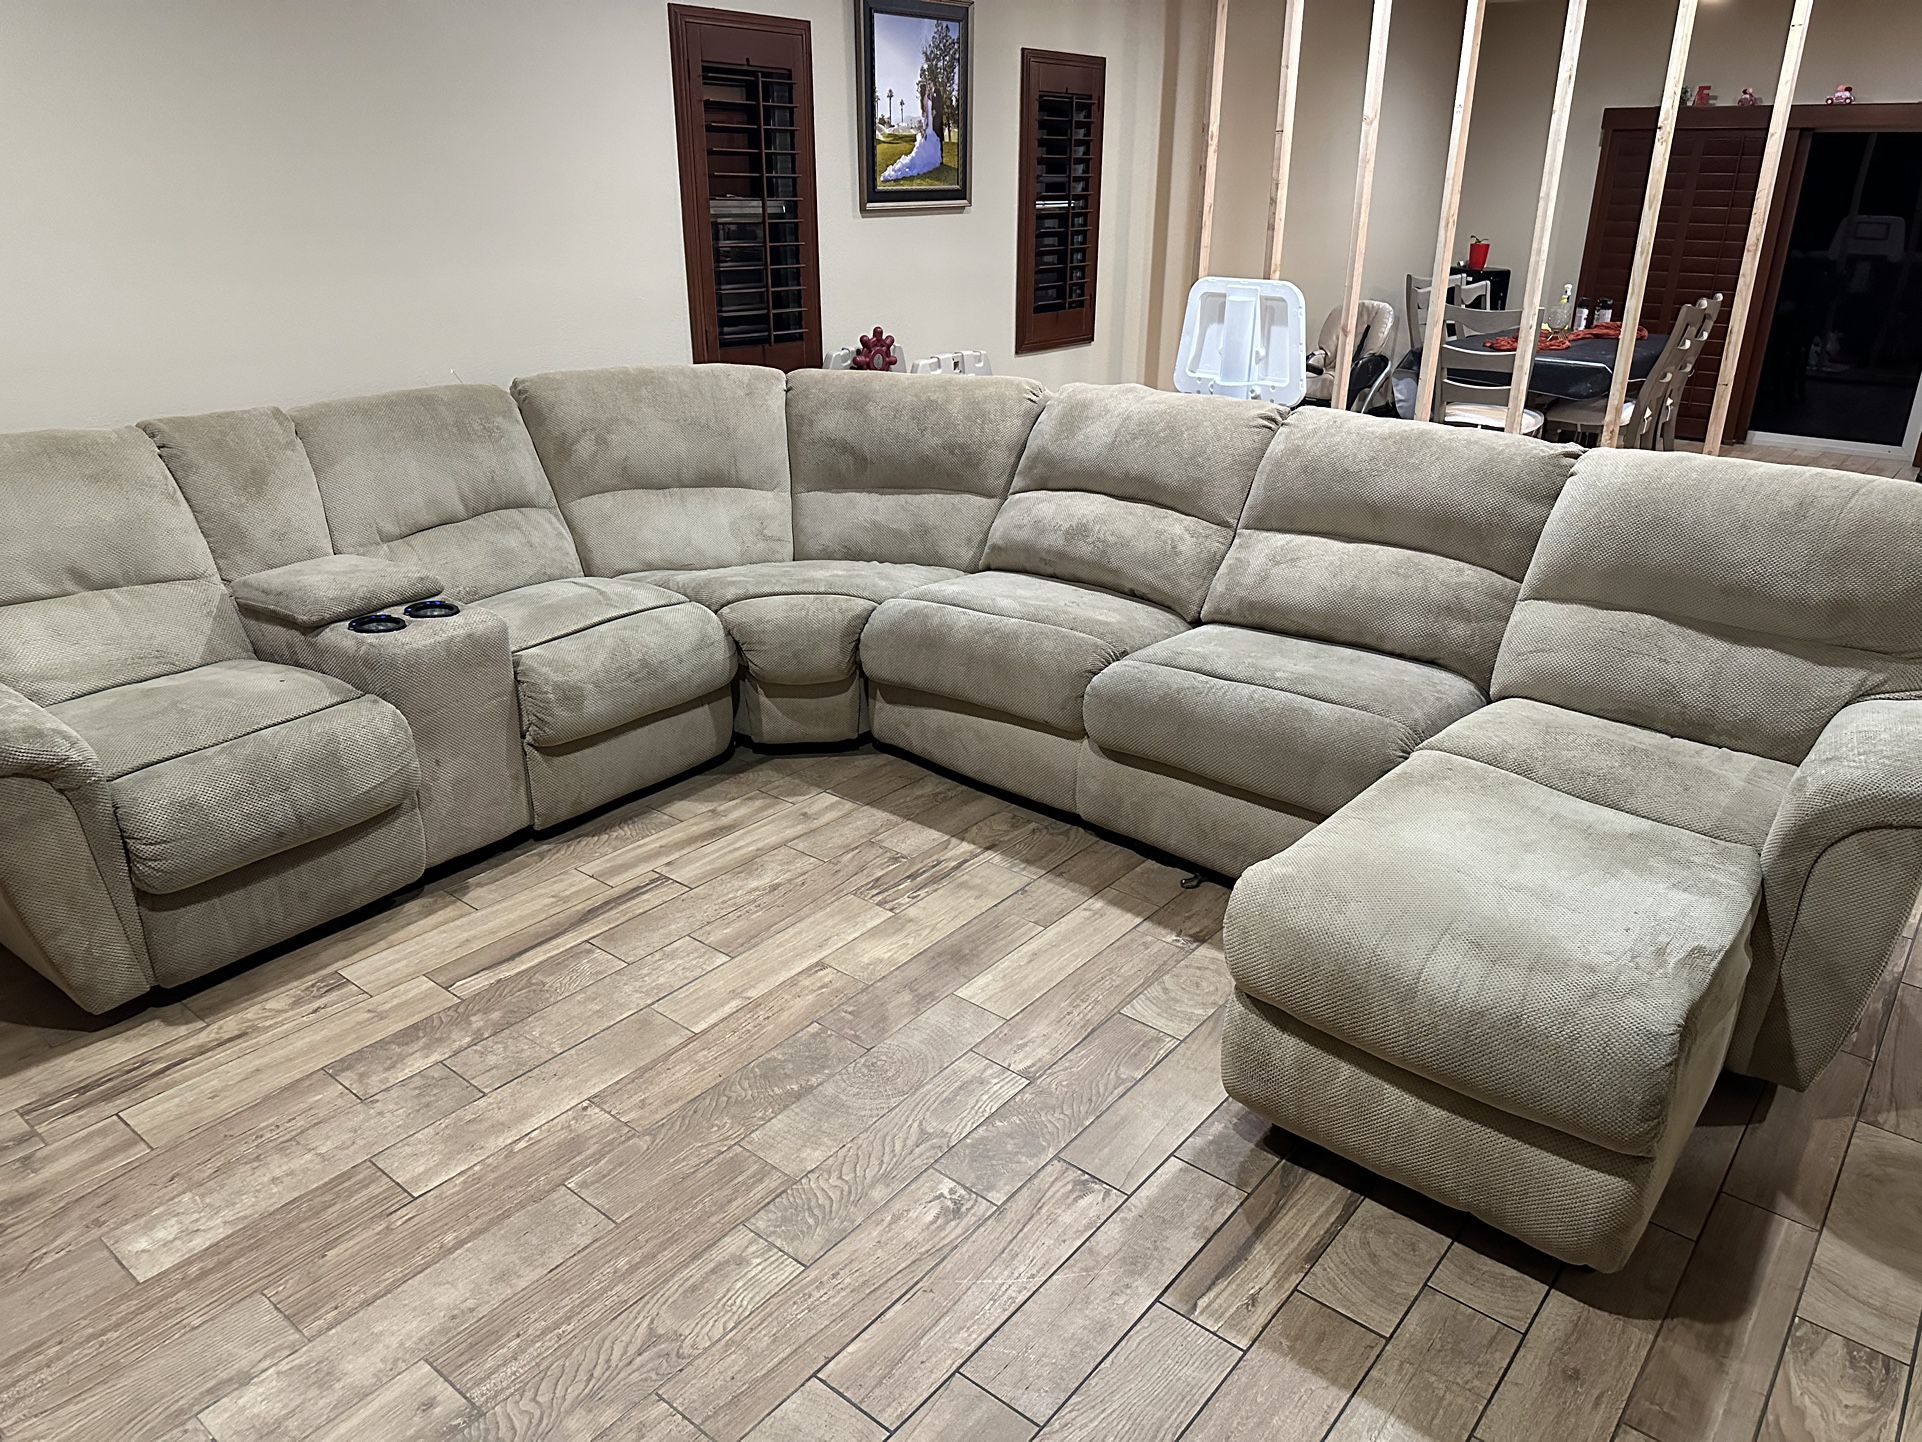 Recliner Sectional W/sofa Bed